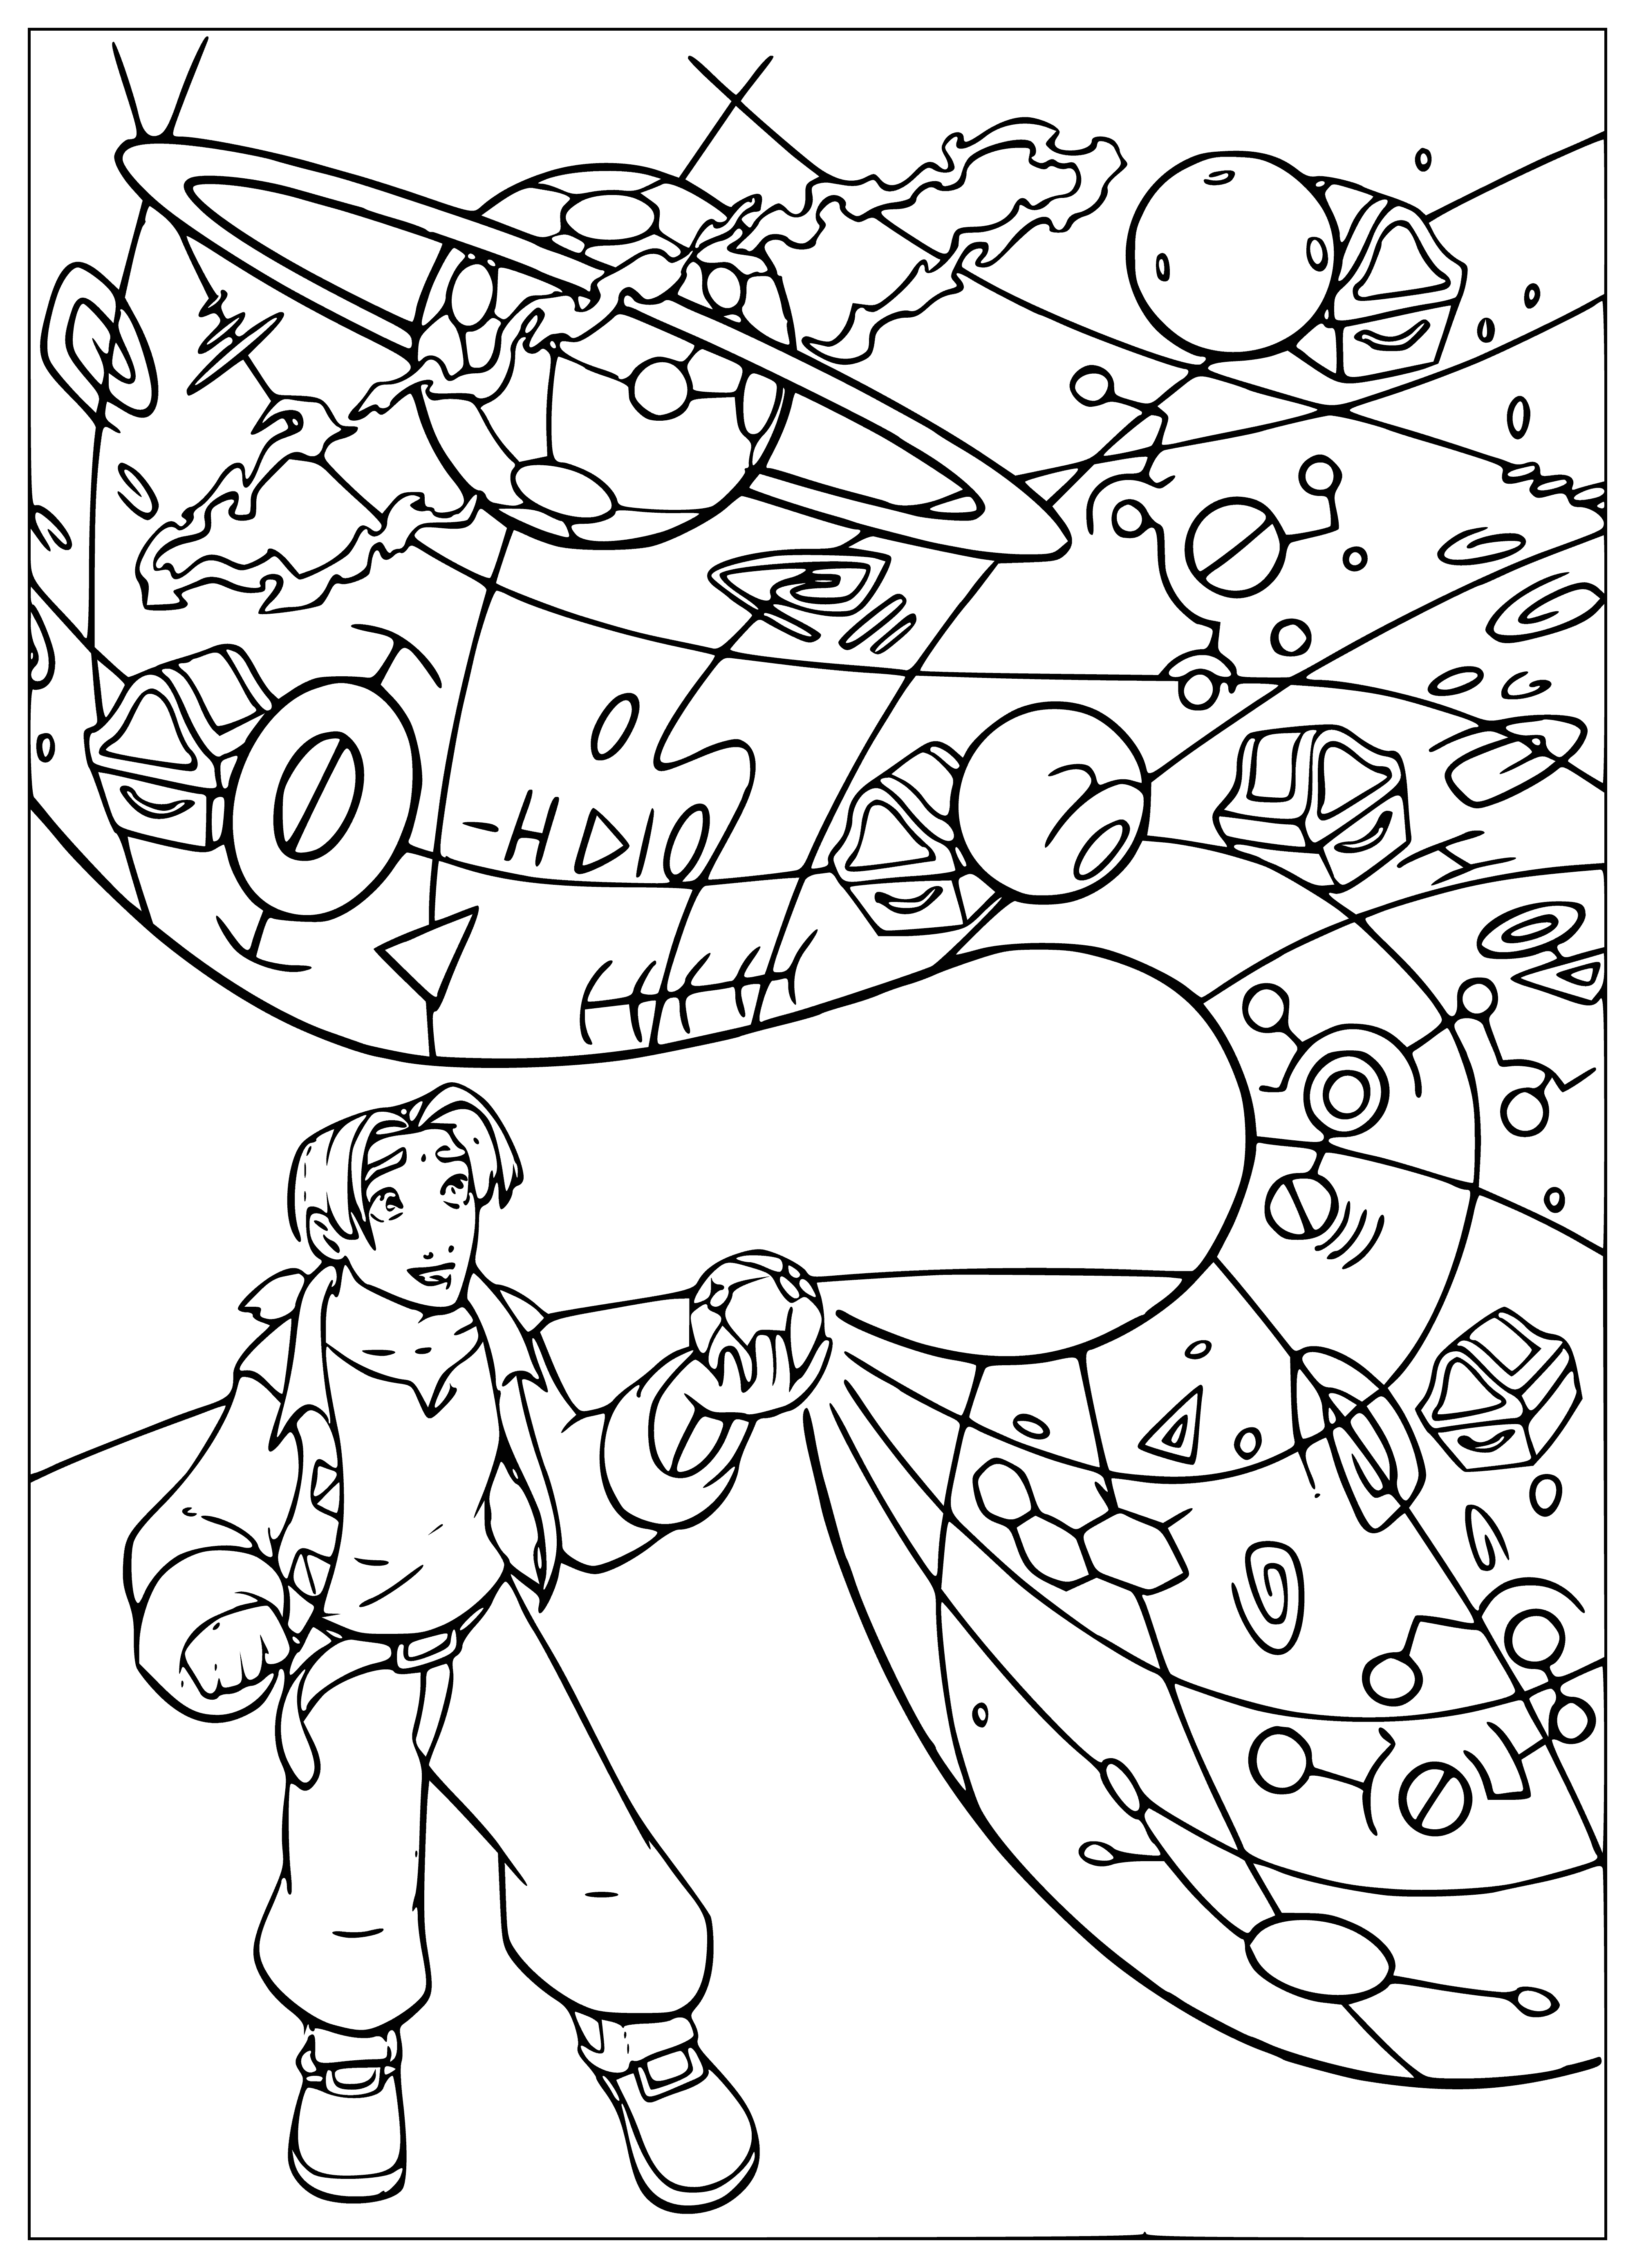 Map in action coloring page